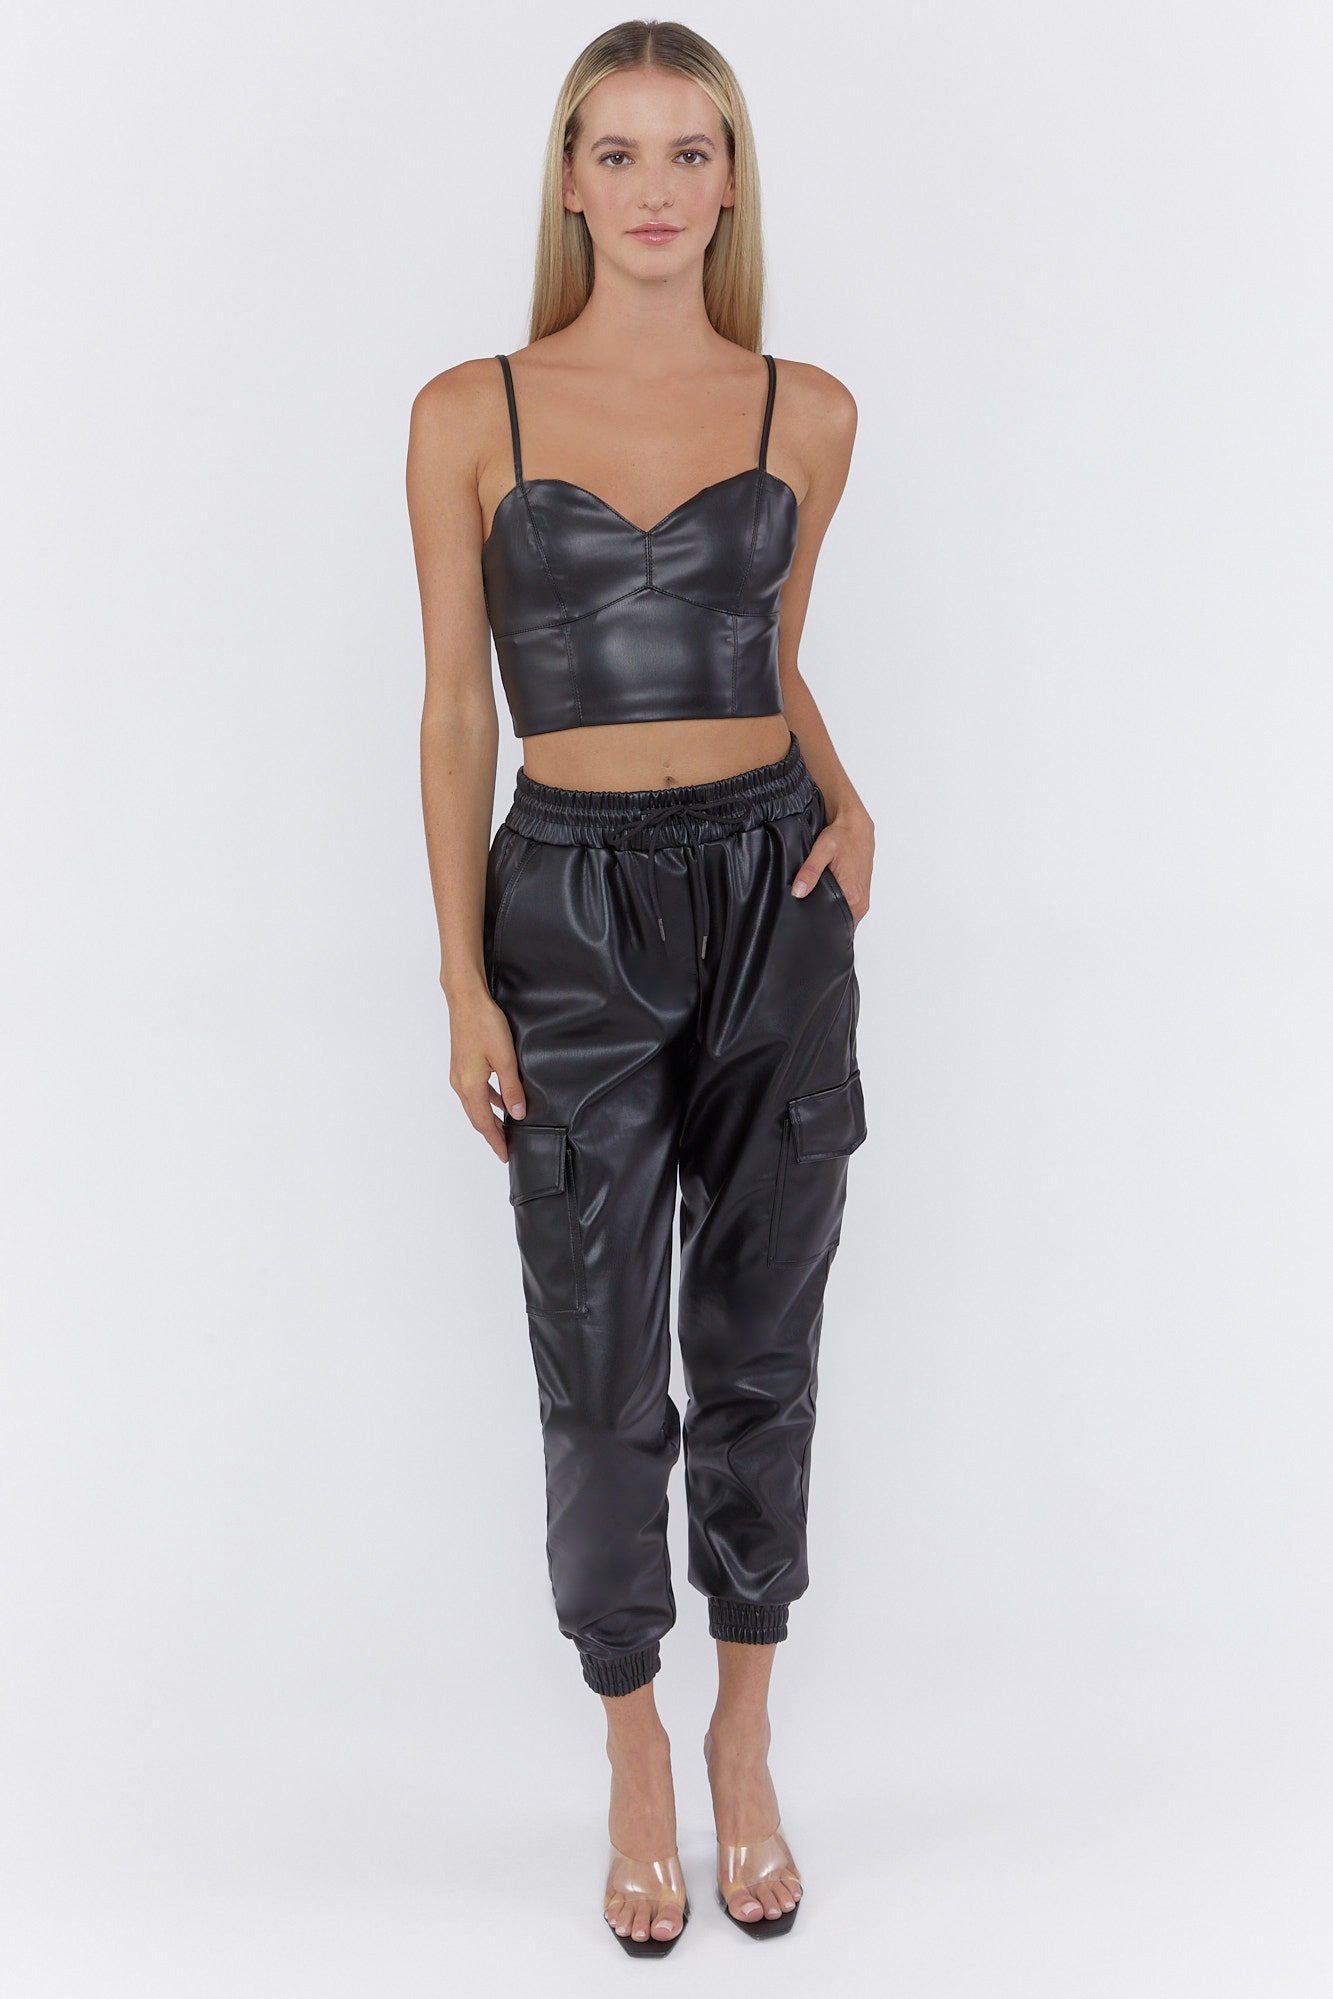 Faux Leather Jogger – Urban Planet